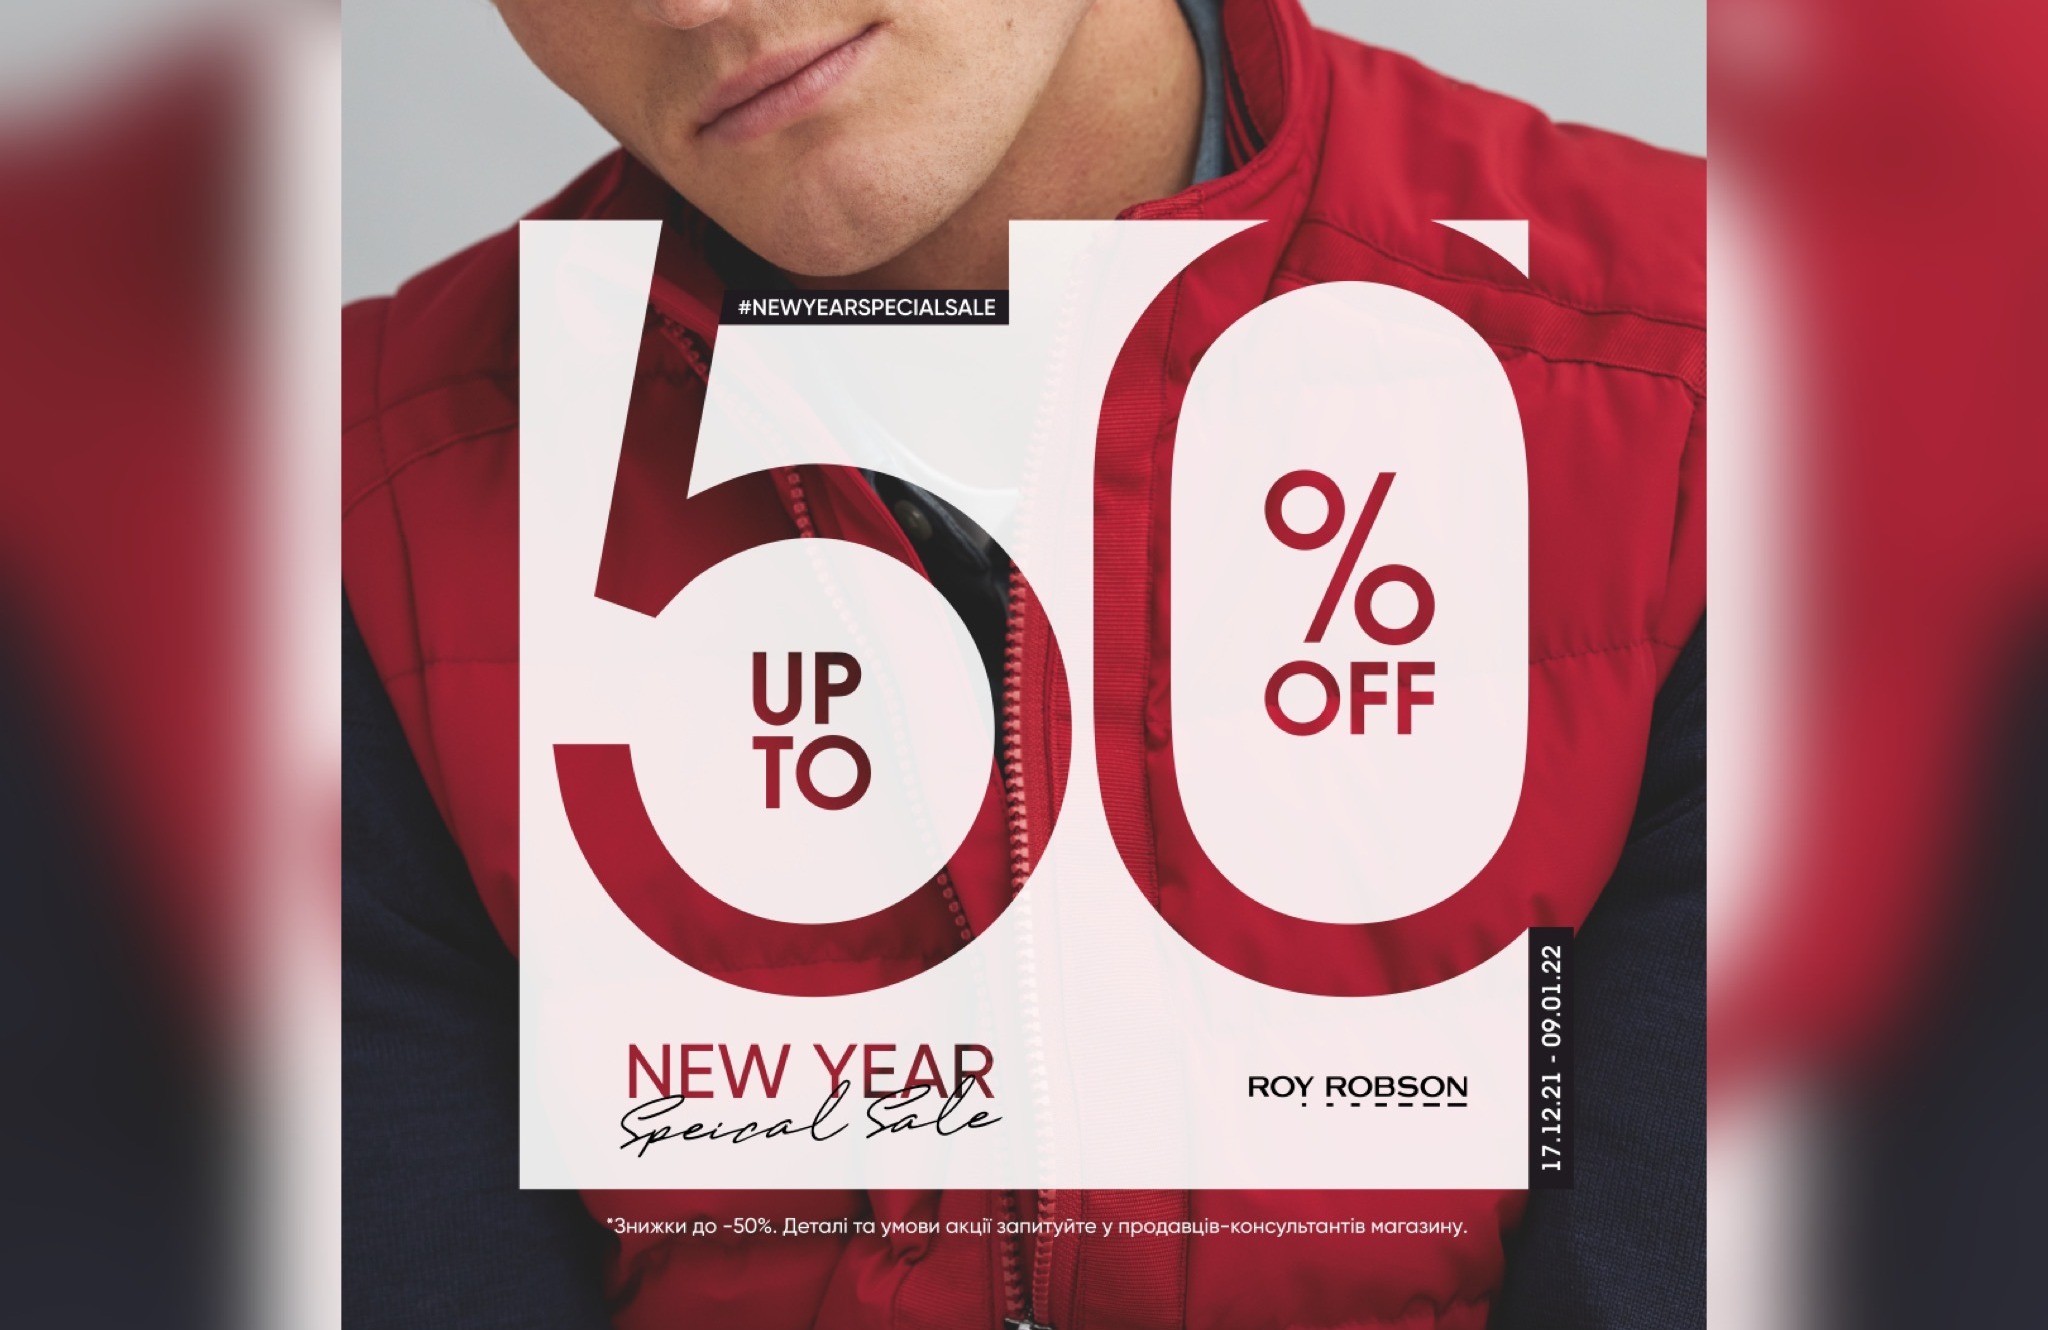 New year sale Roy Robson